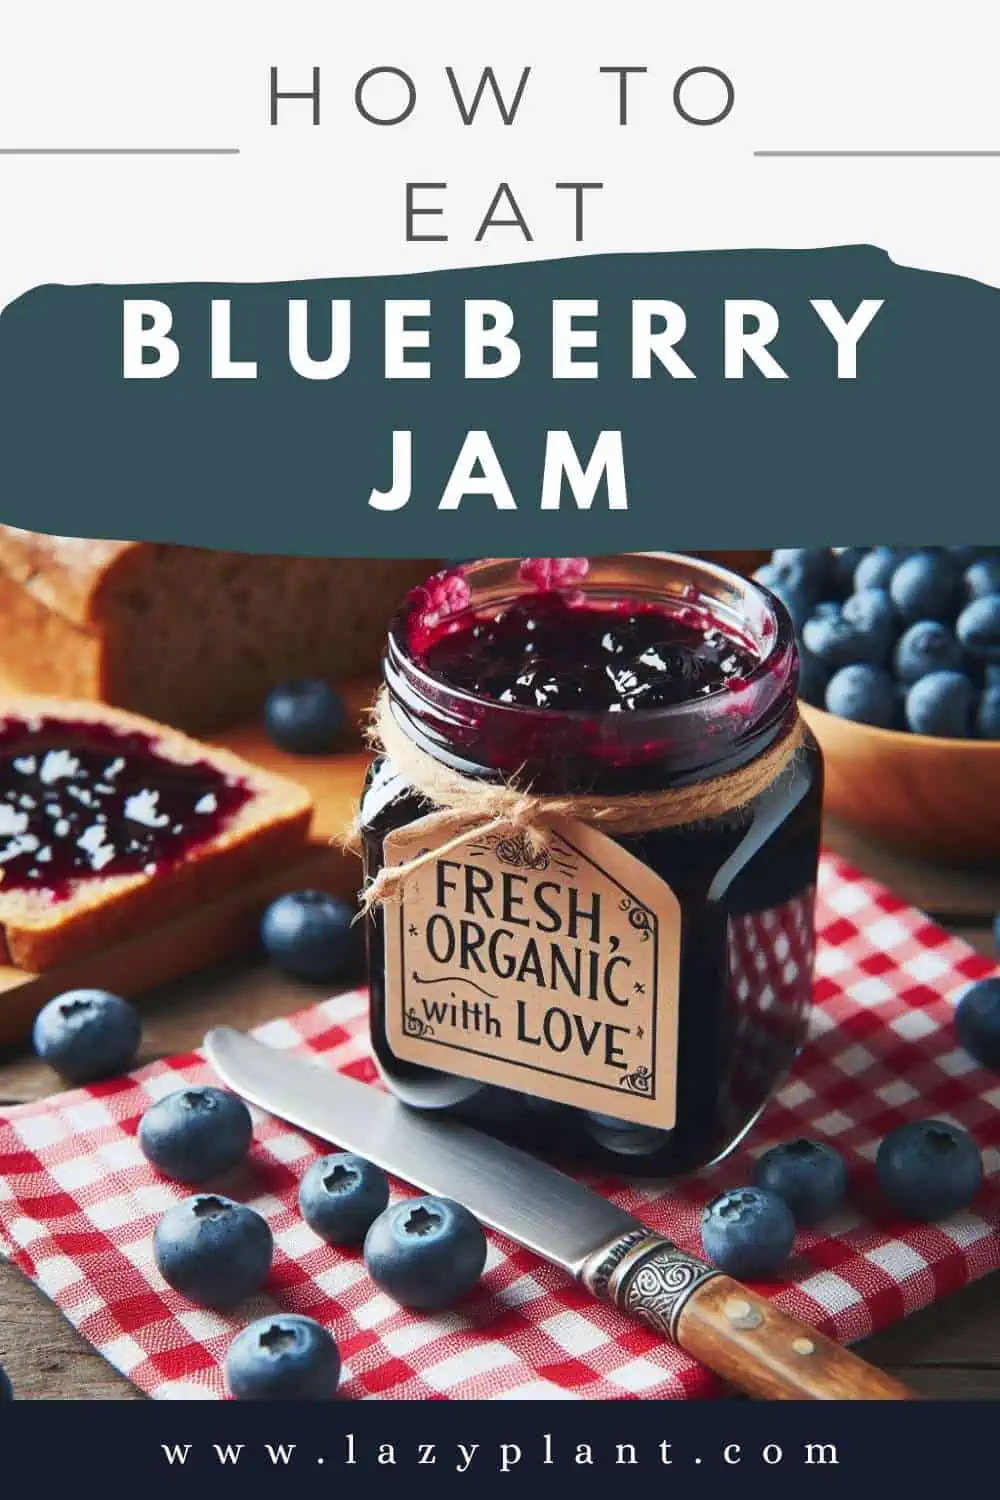 How to eat Blueberry jam for Weight Loss?